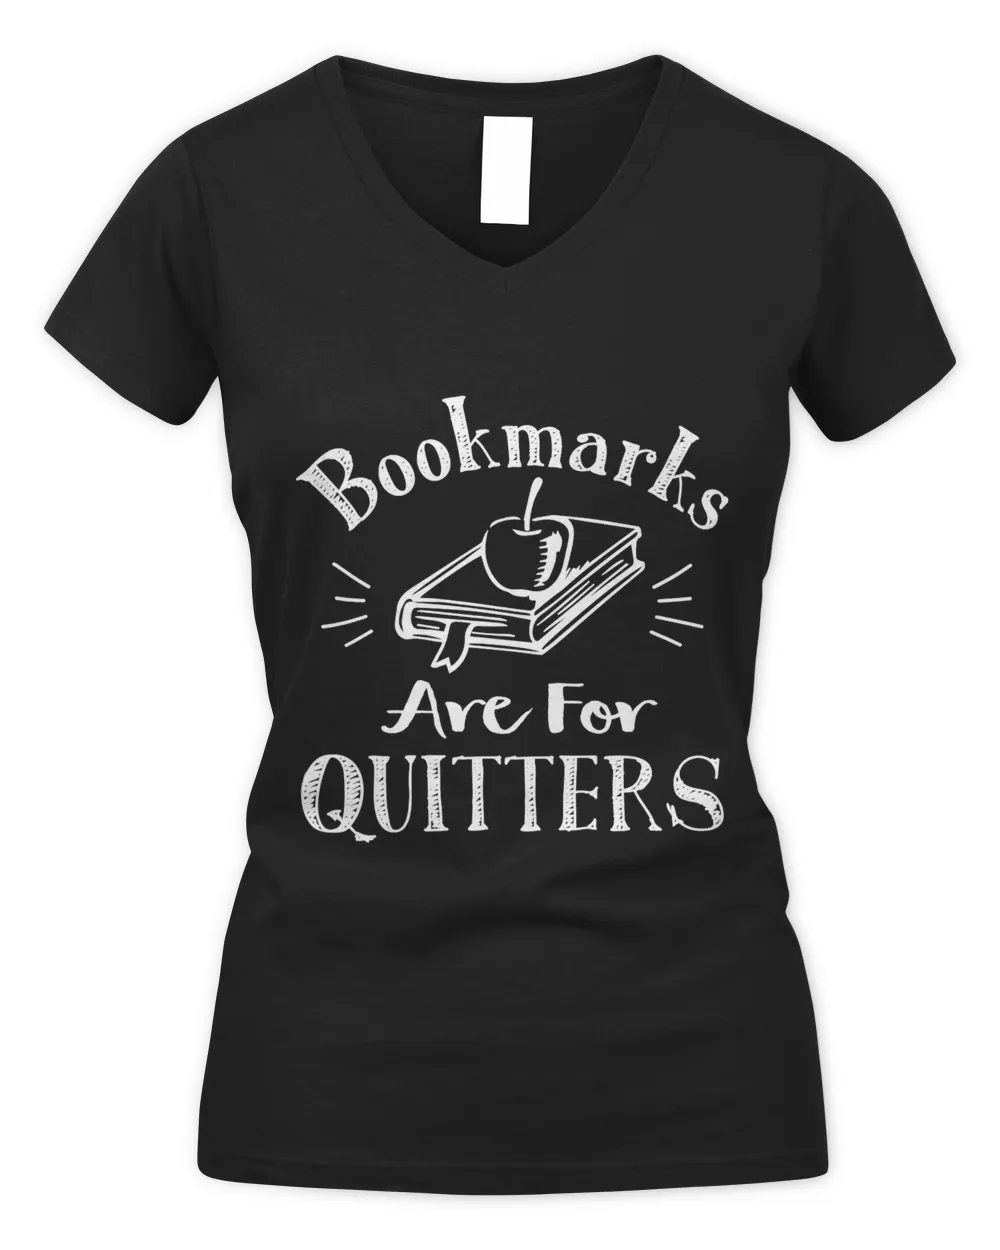 Bookmarks are for quitters